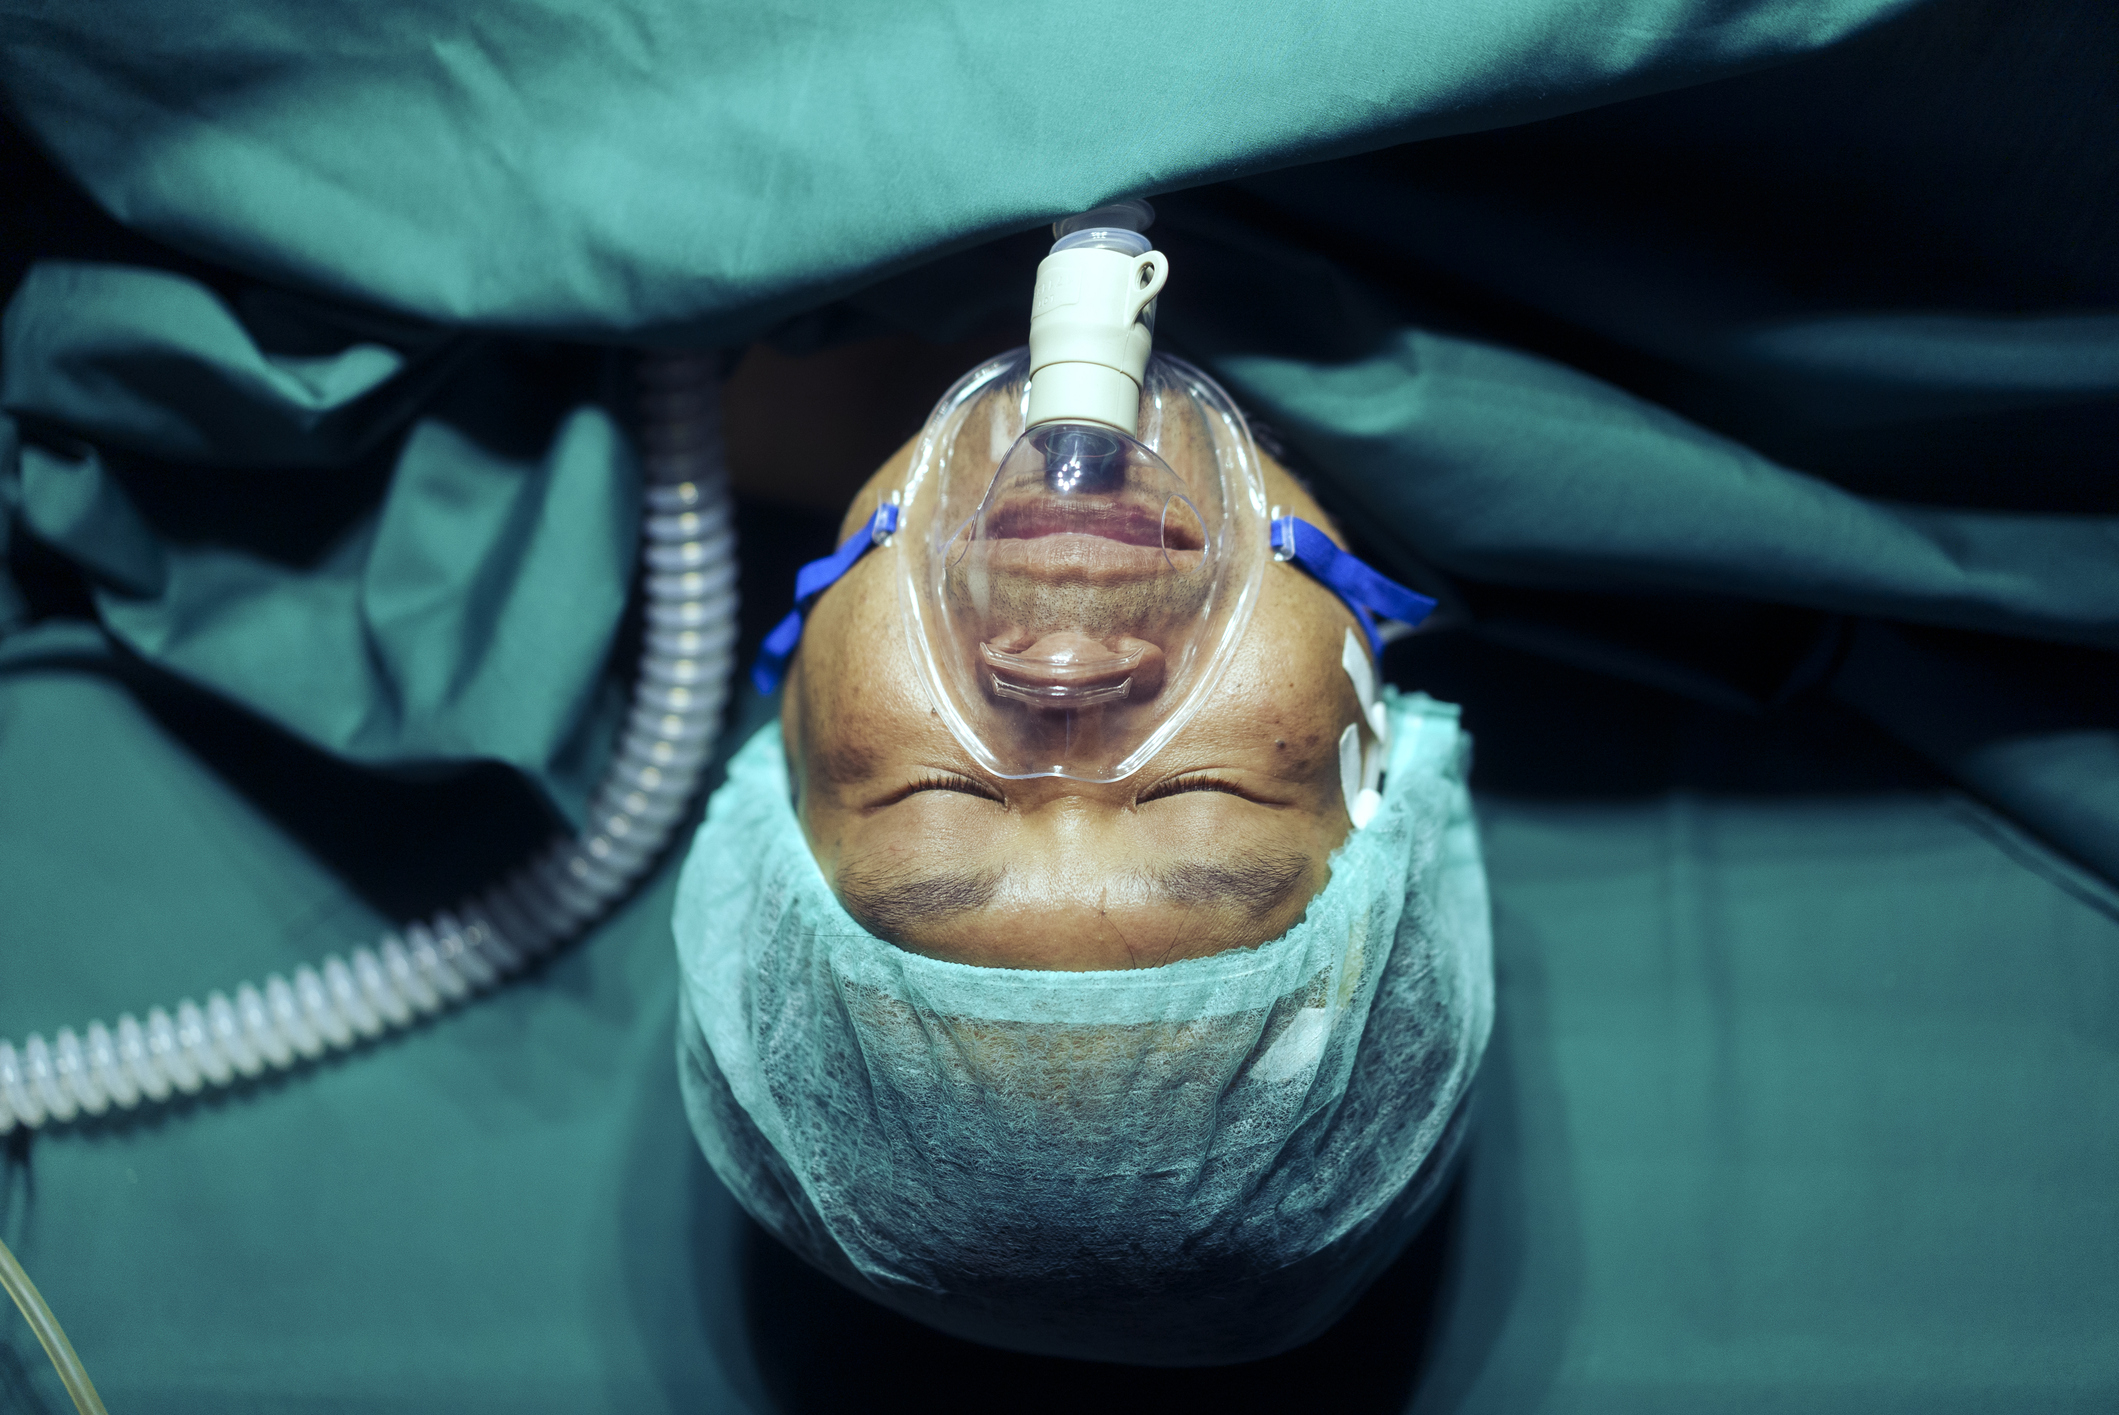 Patient in surgery with an oxygen mask and surgical drape